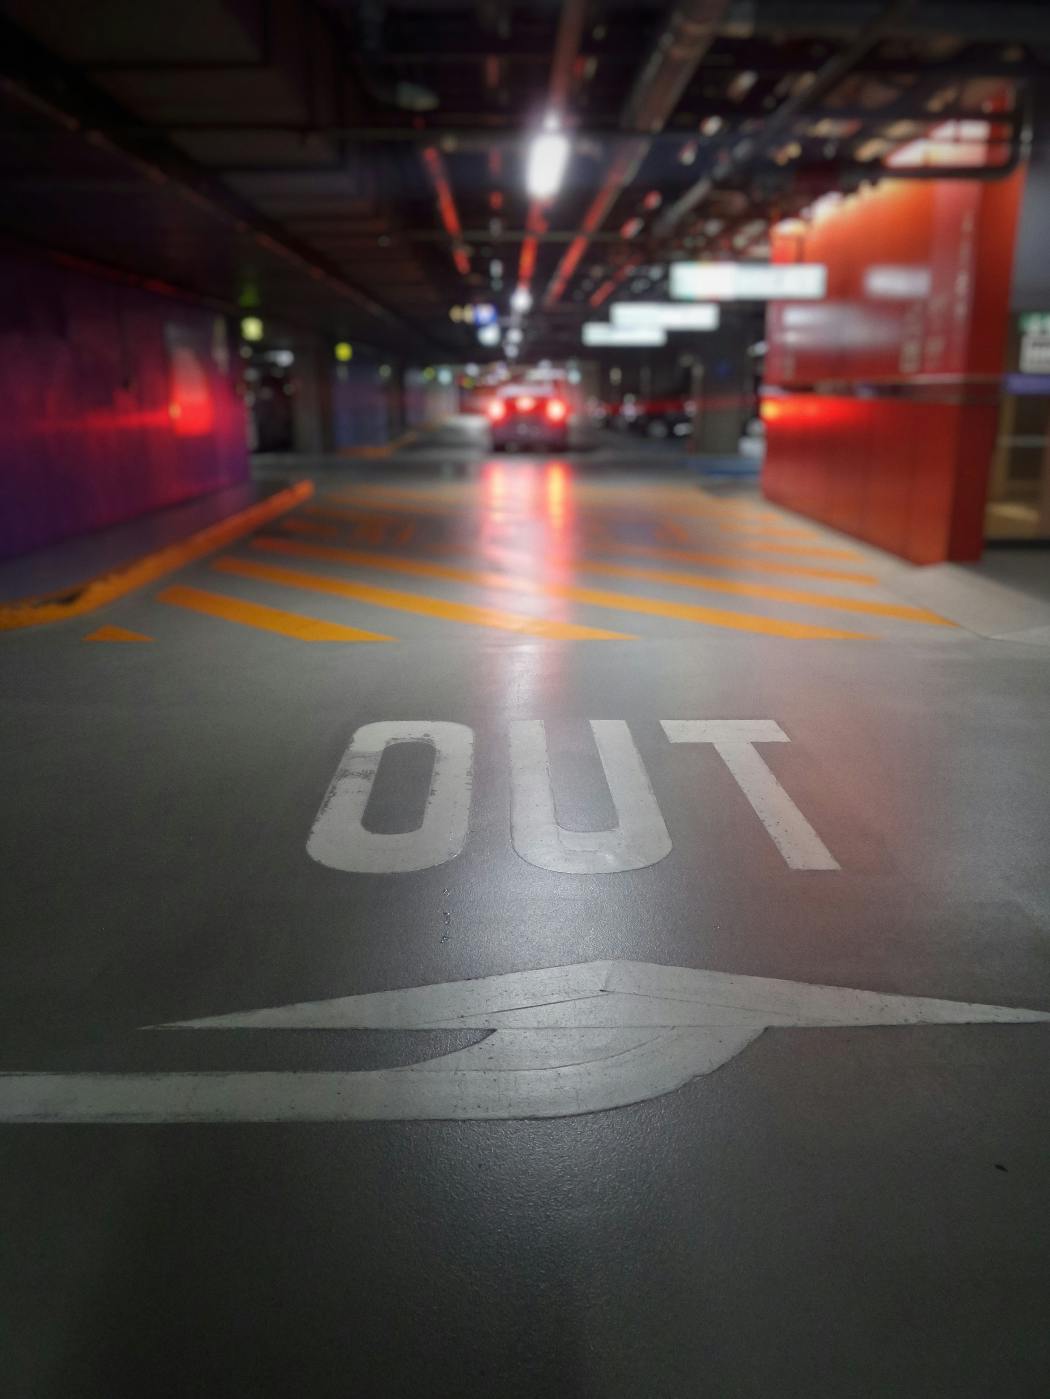 A parking garage with OUT painted on the floor